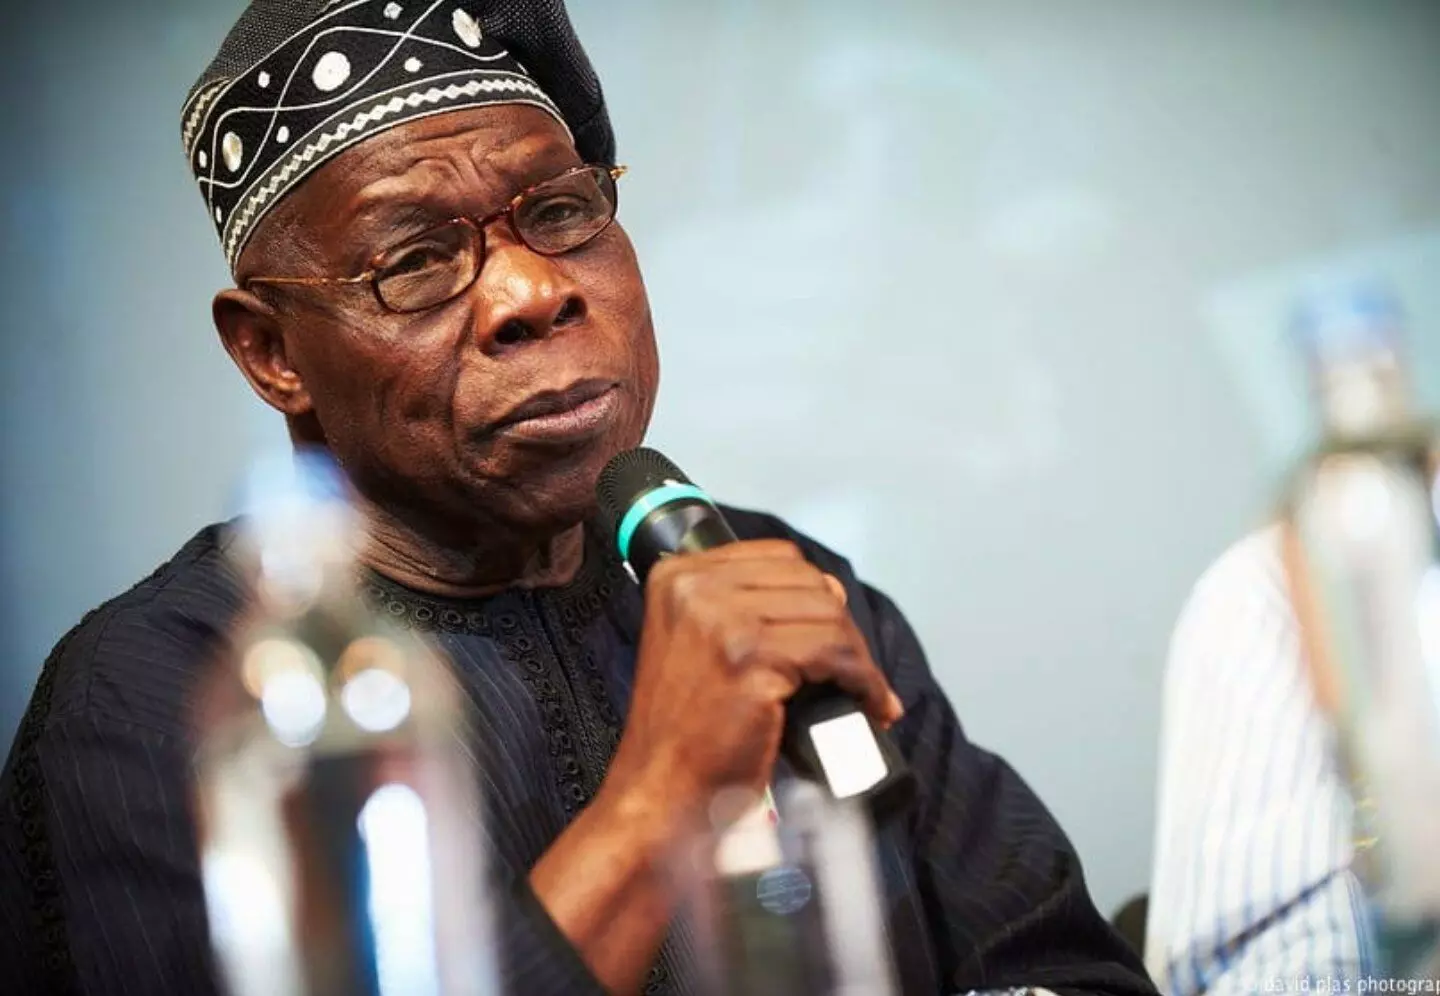 Dont strew Nigeria with your opinions -BMO cautions Obasanjo